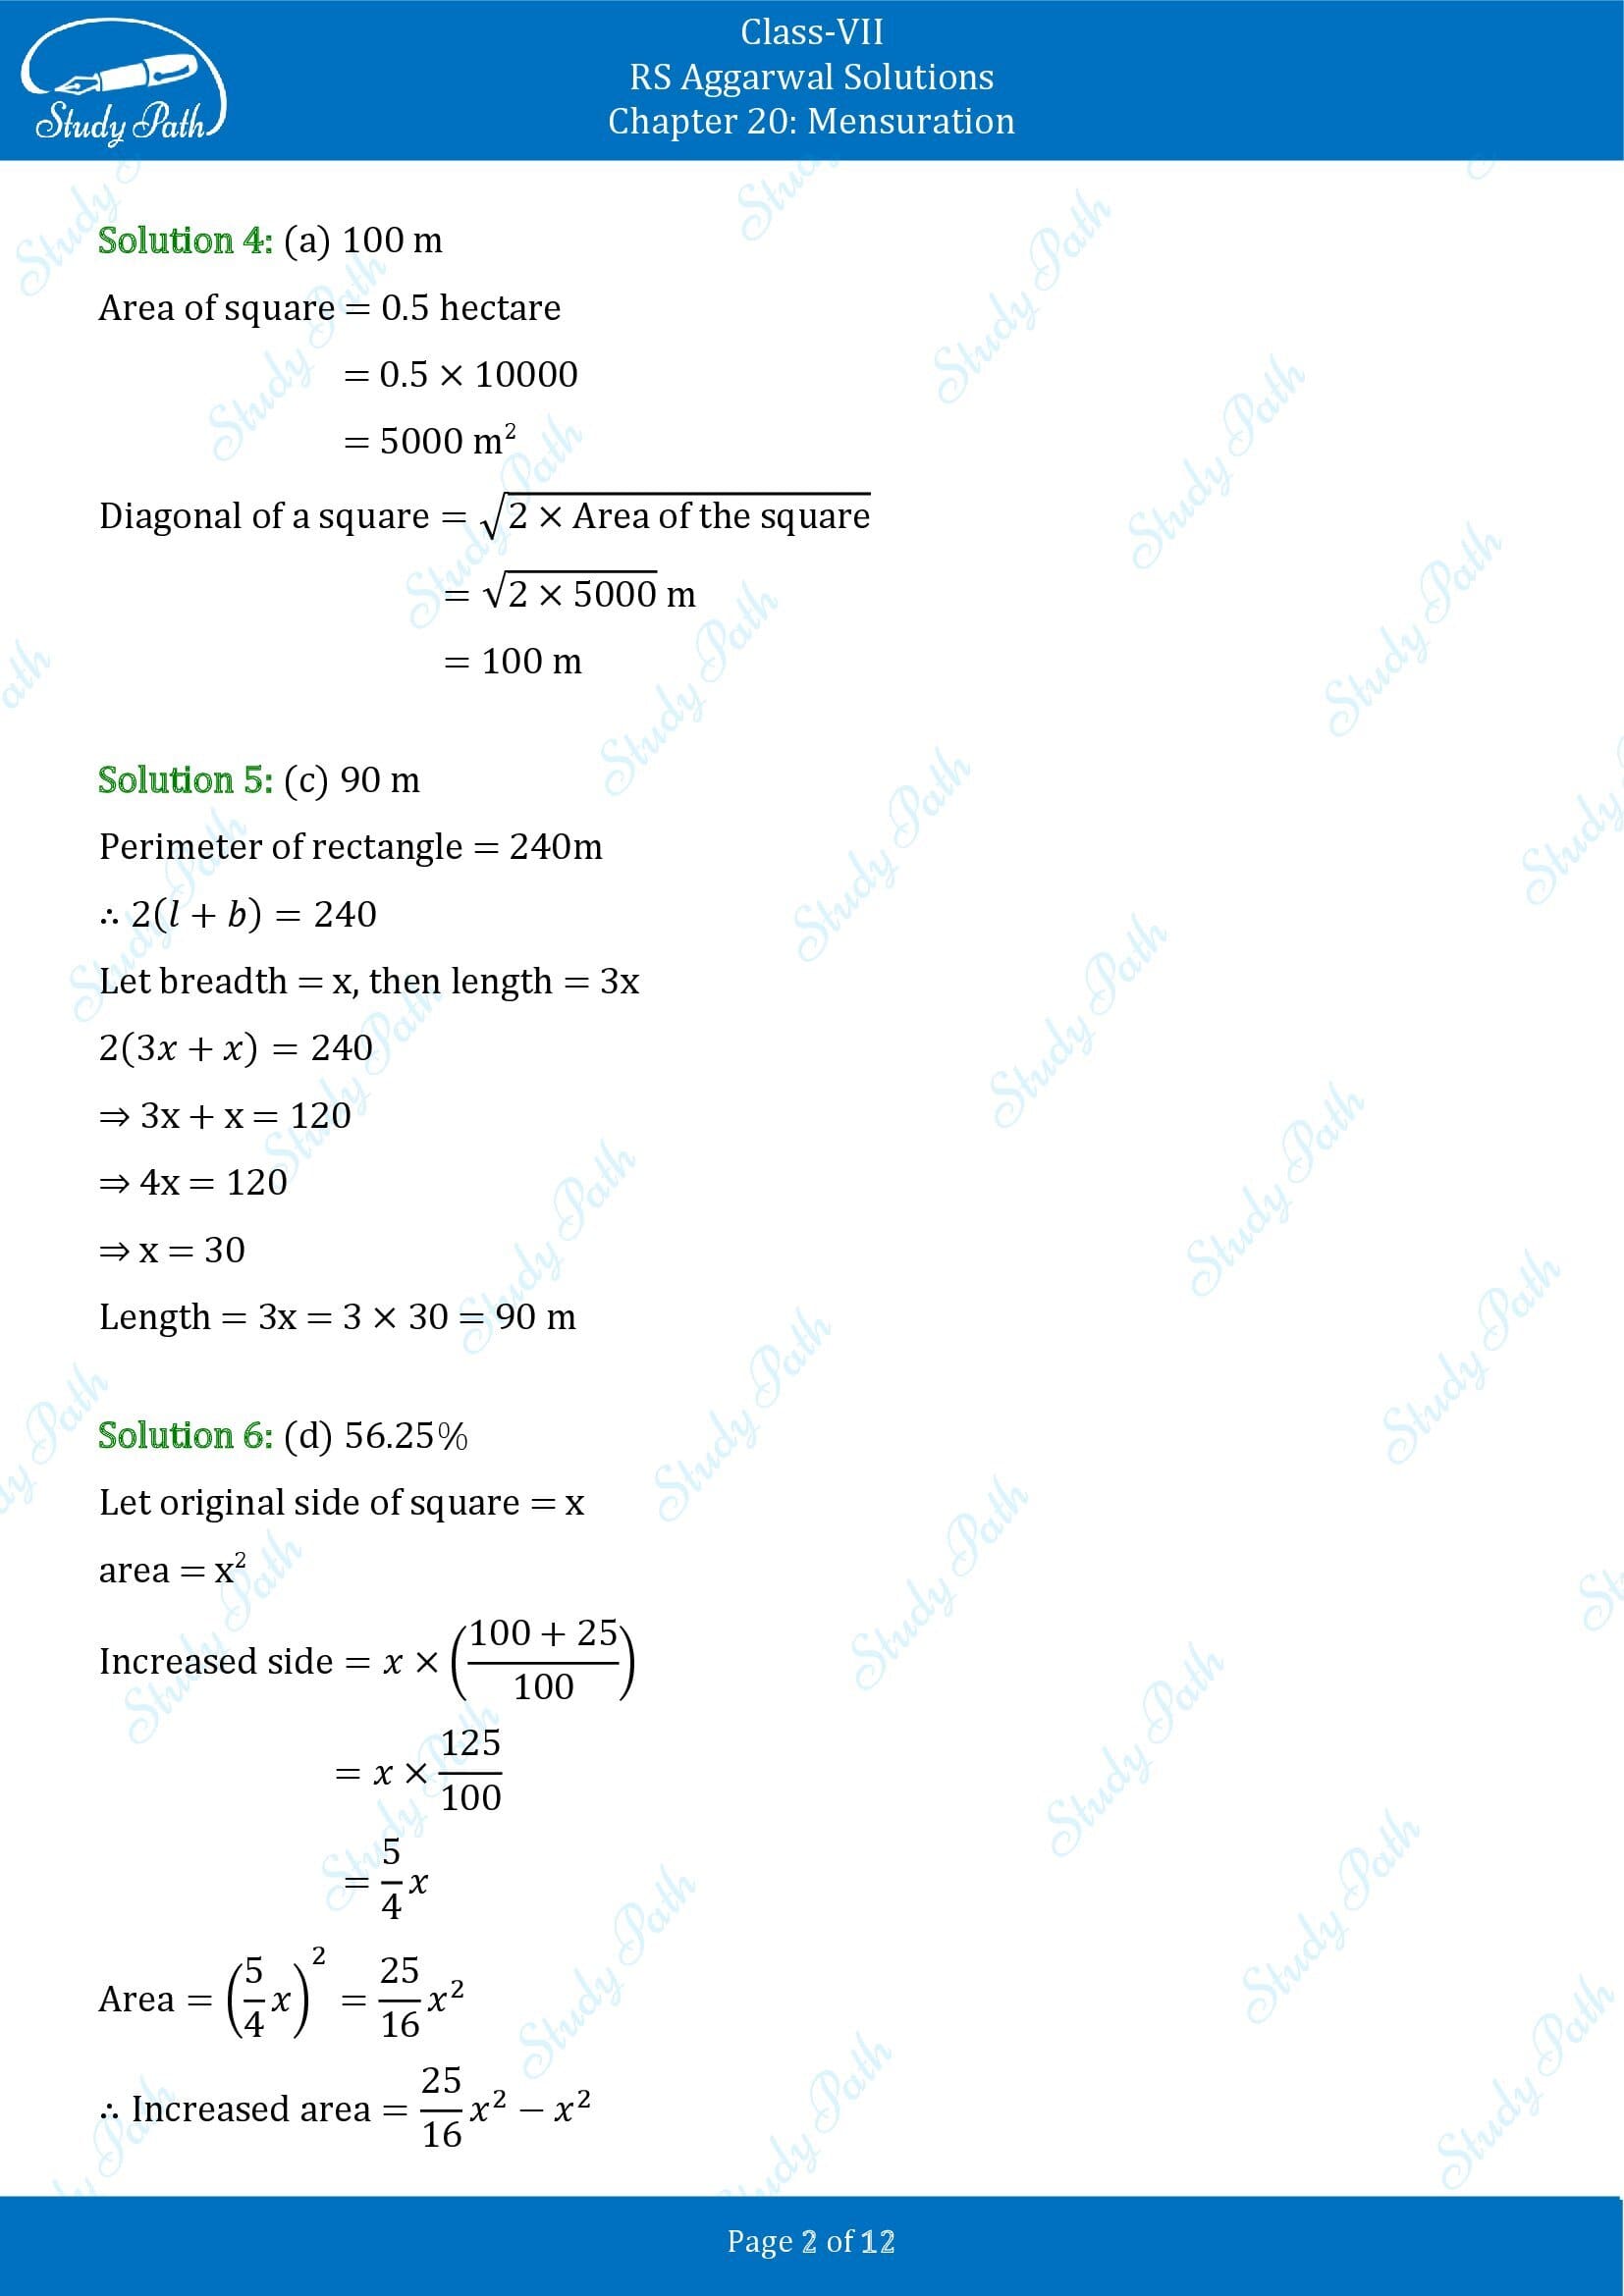 RS Aggarwal Solutions Class 7 Chapter 20 Mensuration Exercise 20G MCQ 00002